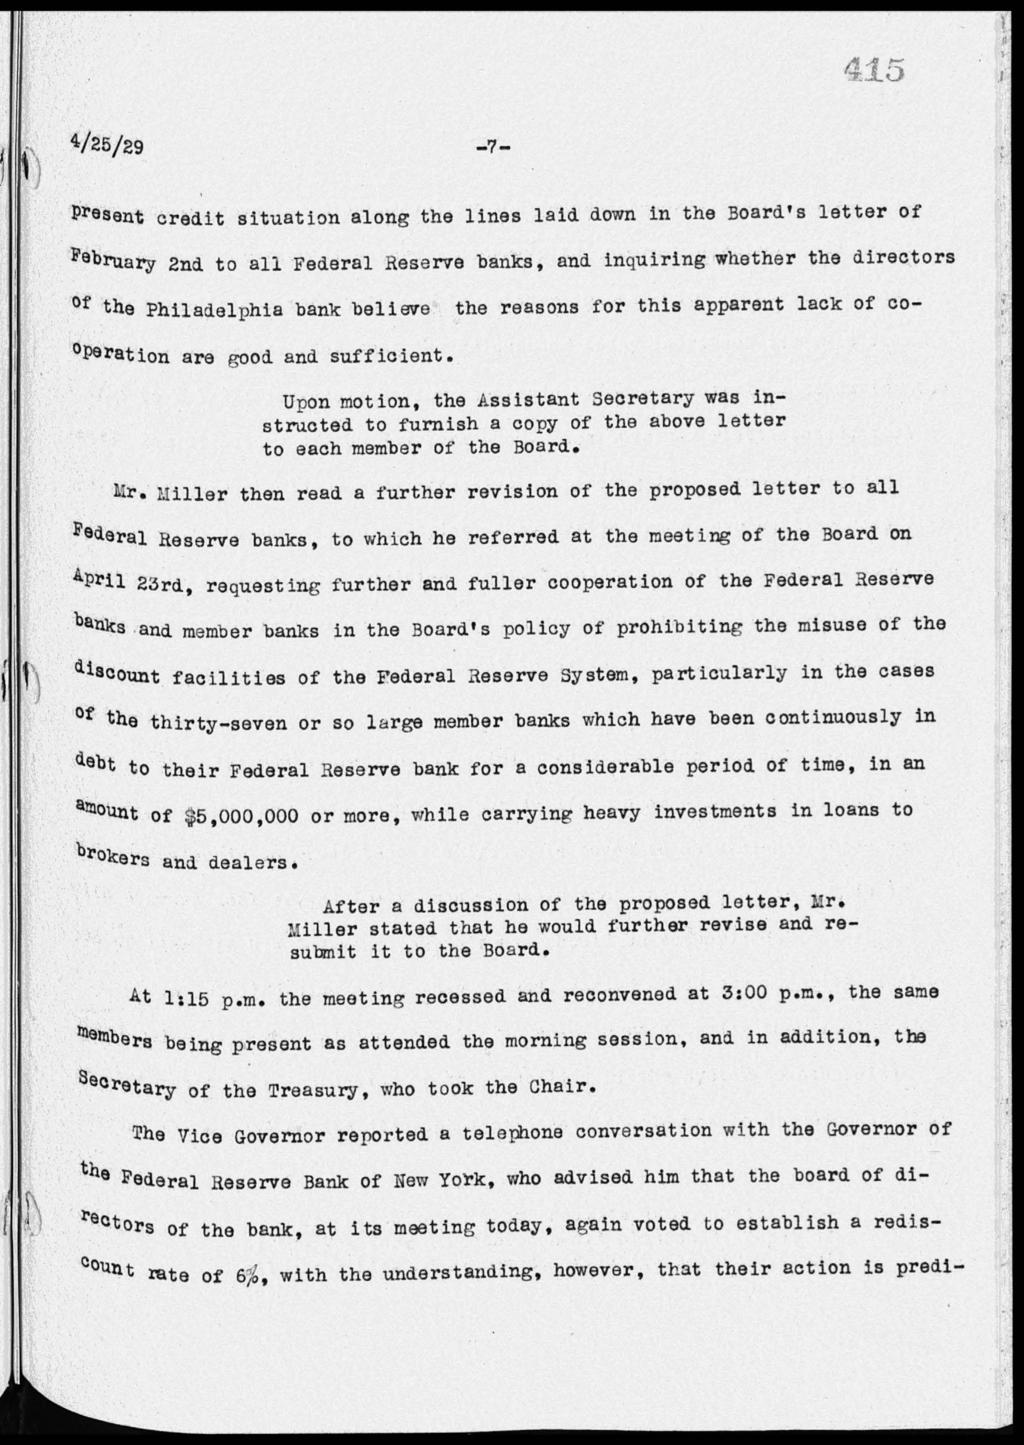 4/25/29-7- Present credit situation along the lines laid down in the Board's letter of F ebruary 2nd to an Federal Reserve banks, and inquiring whether the directors Of the Philadelphia bank believe